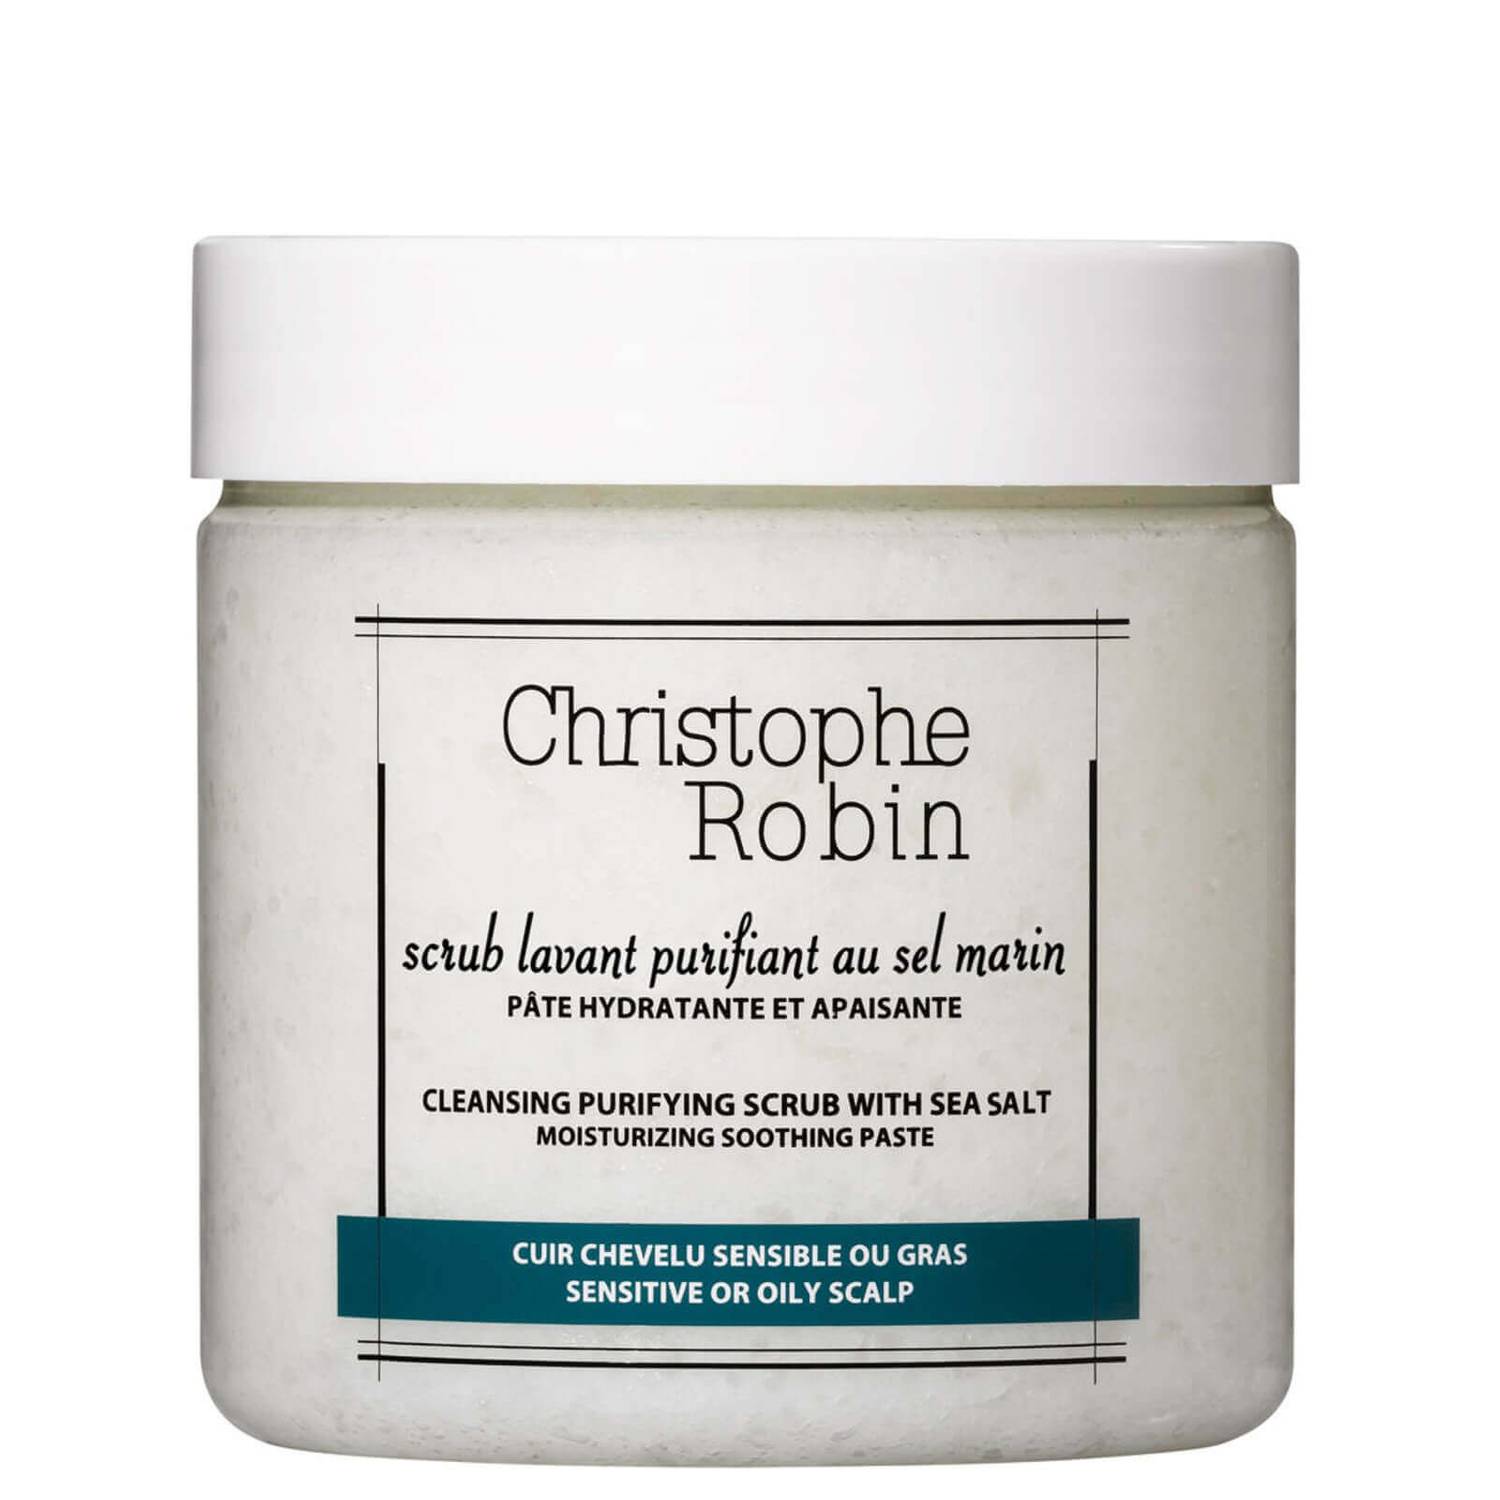 Best Scalp Hair Treatments: Christophe Robin Cleansing Purifying Scrub with Sea Salt